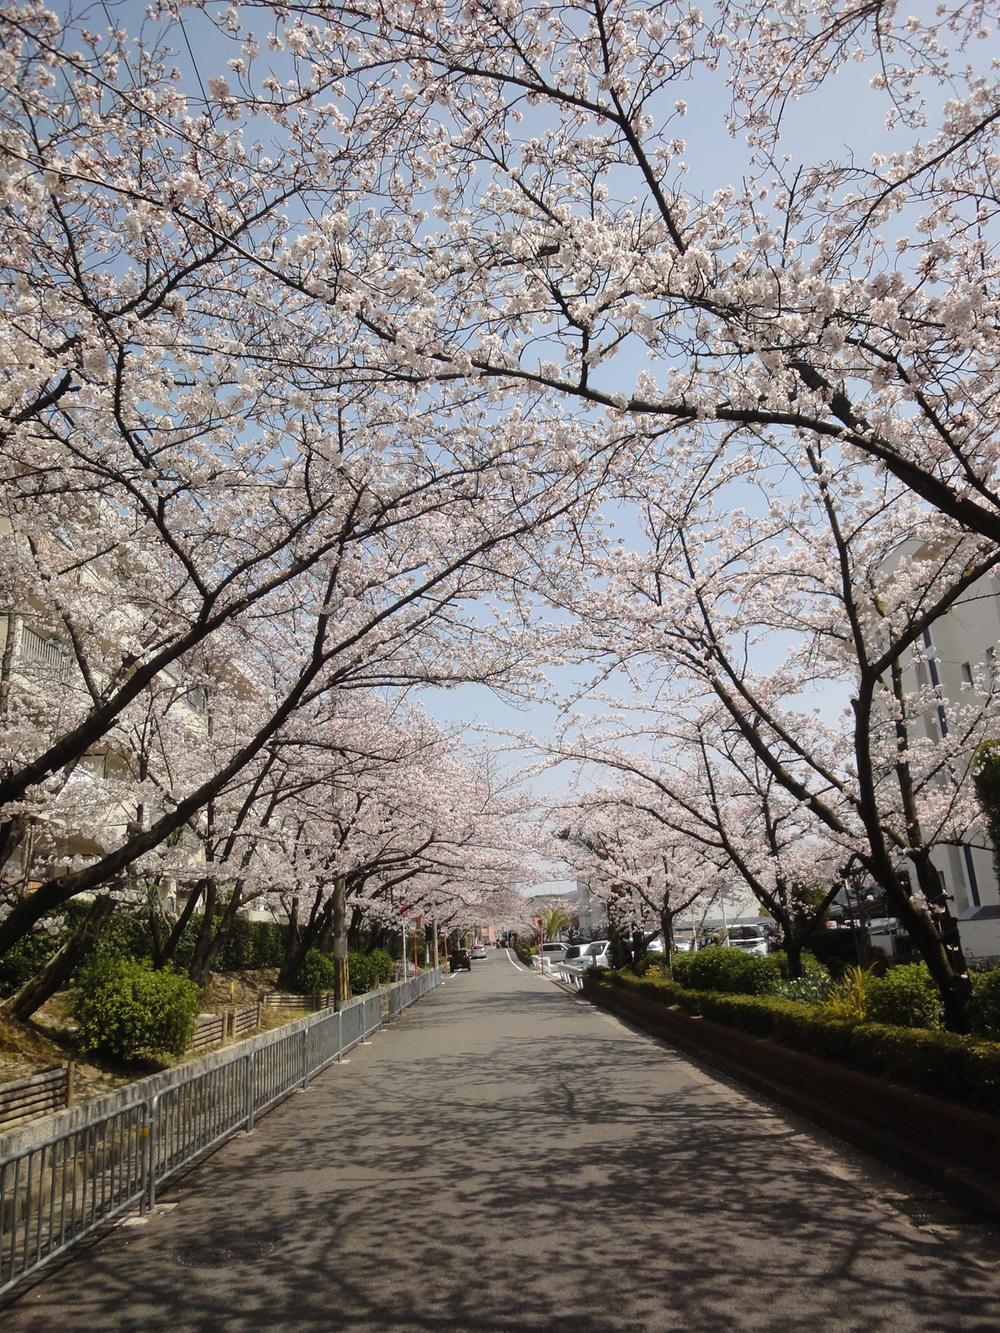 Streets around. 50m Miigaoka until the cherry trees of Mitsui housing complex, It is famous for beautiful cherry blossoms, such as "Mitsui complex" and "launch River flood control green space".